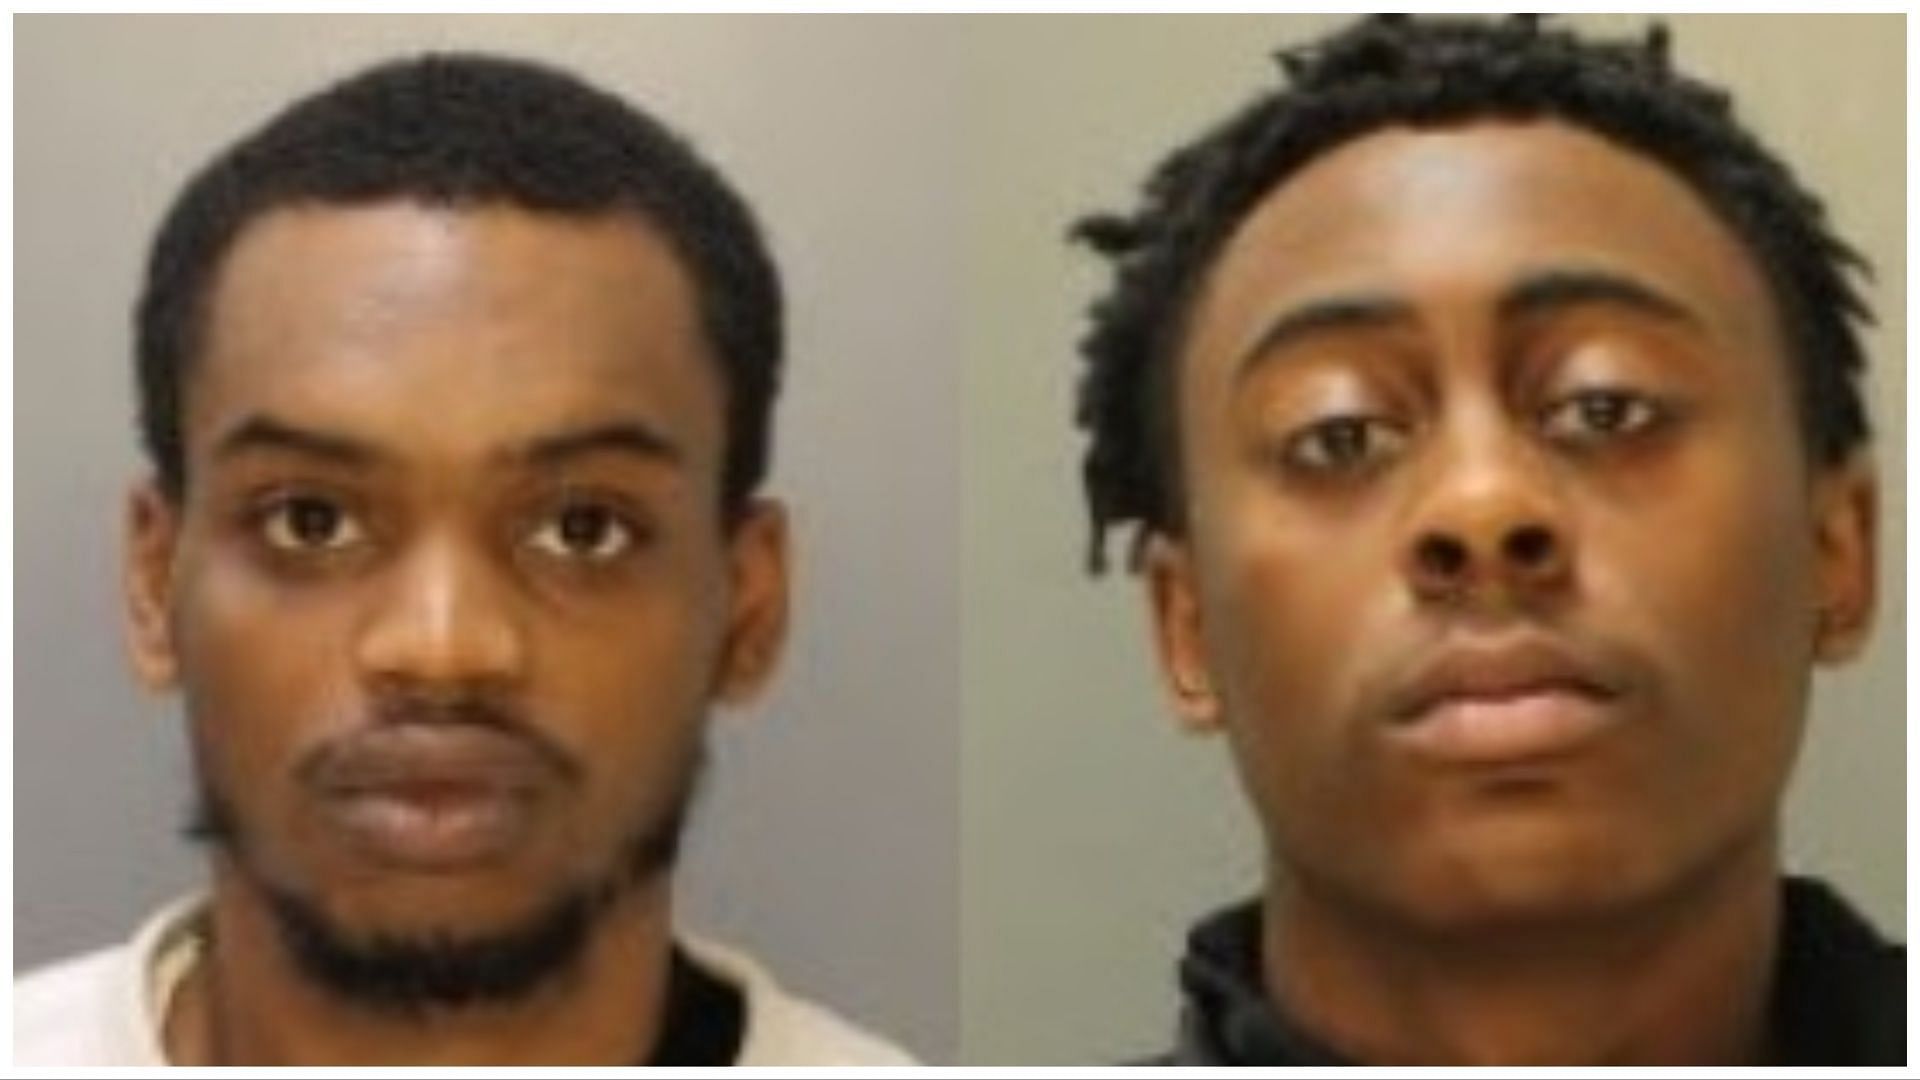 Nasir Grant (left) was found, however, Ameen Hurst (right) is still at large, (Image via Julie Pearl/Twitter)